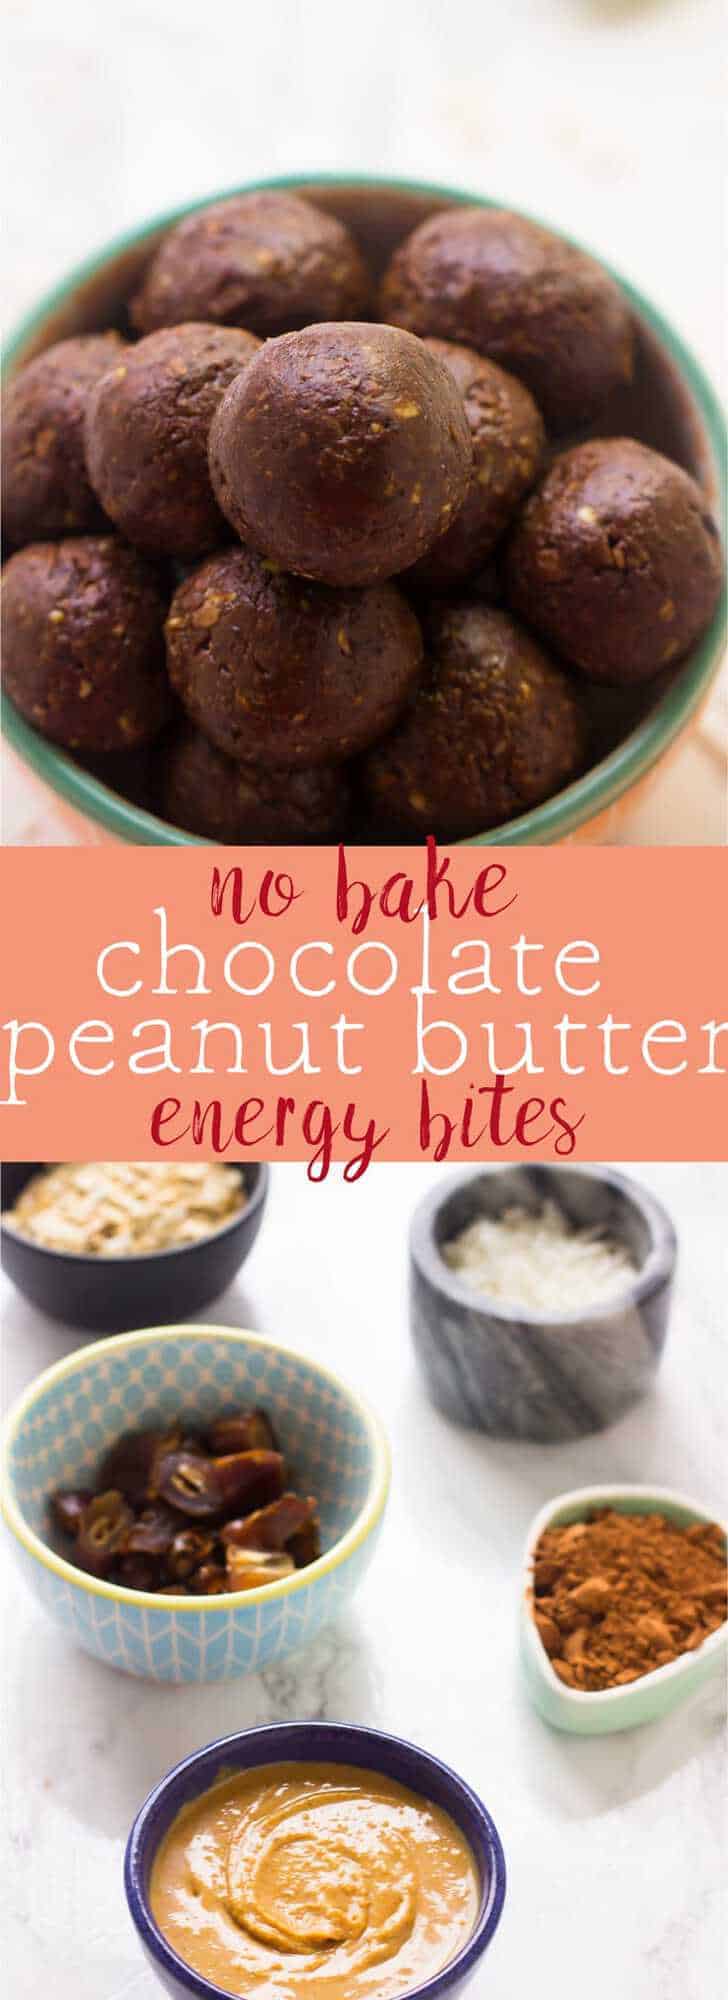 These No Bake Chocolate Peanut Butter Energy Bites are made with only 5 ingredients, vegan and gluten-free and are a perfect quick healthy breakfast or snack! via https://jessicainthekitchen.com